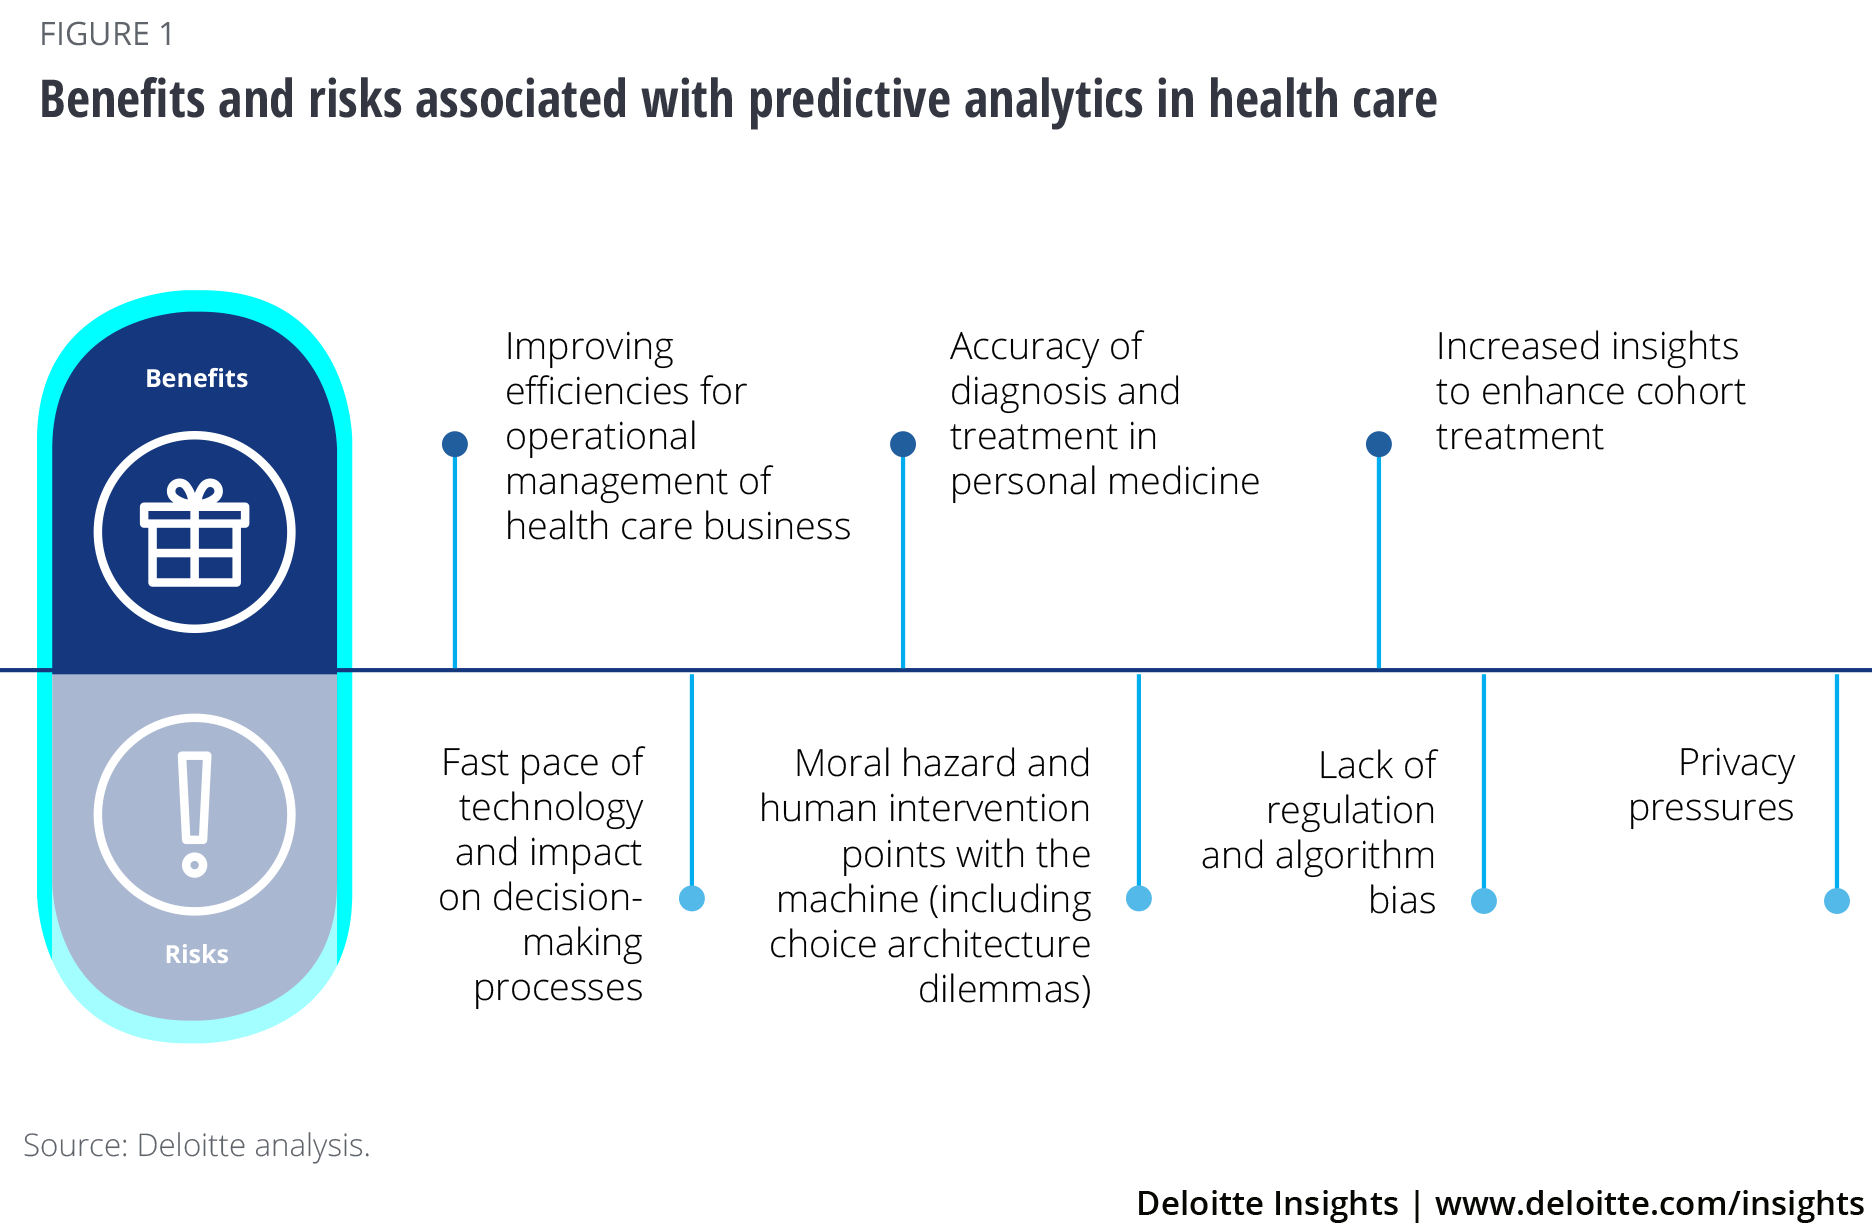 Source: <a href="https://www2.deloitte.com/content/dam/insights/us/articles/au22113_predictive-analytics-in-health-care/figures/AU22113_fig1.png">https://www2.deloitte.com/content/dam/insights/us/articles/au22113_predictive-analytics-in-health-care/figures/AU22113_fig1.png</a>